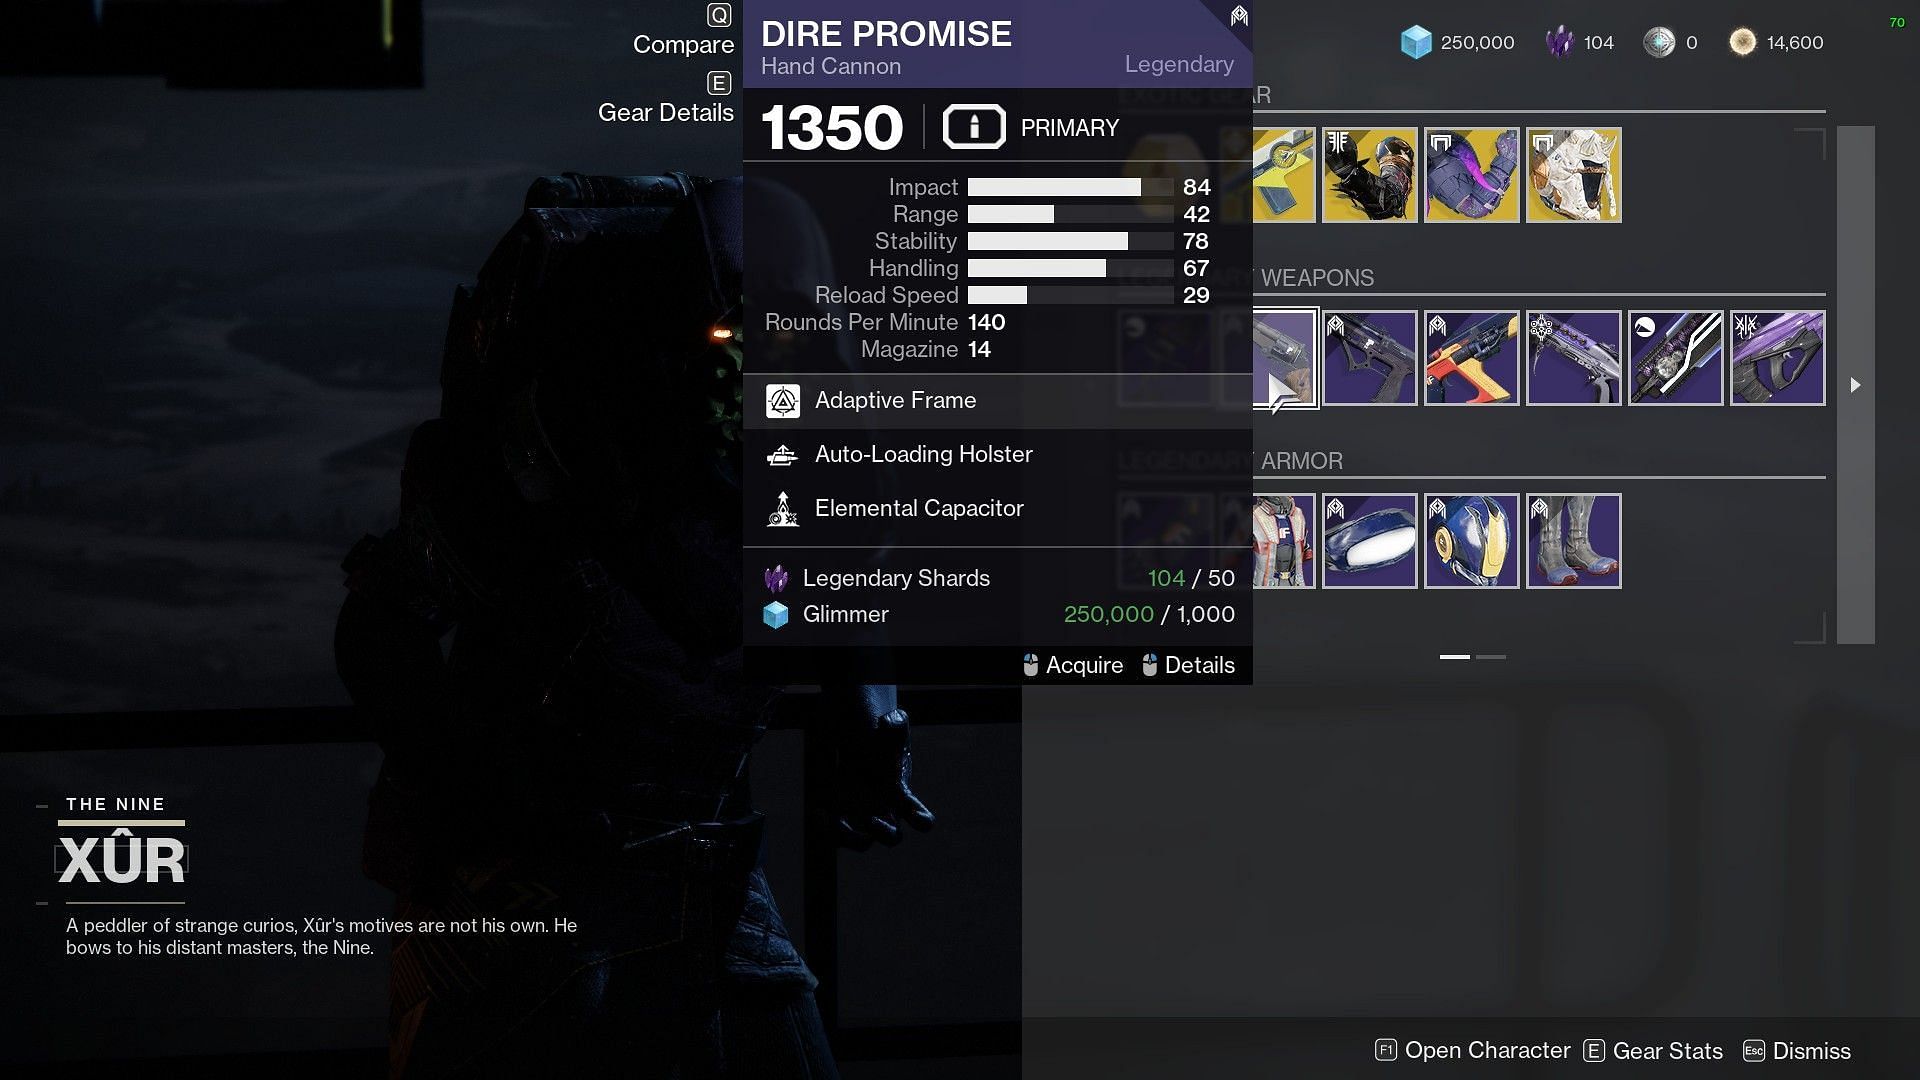 Dire Promise for sale on Xur (Image via Bungie)